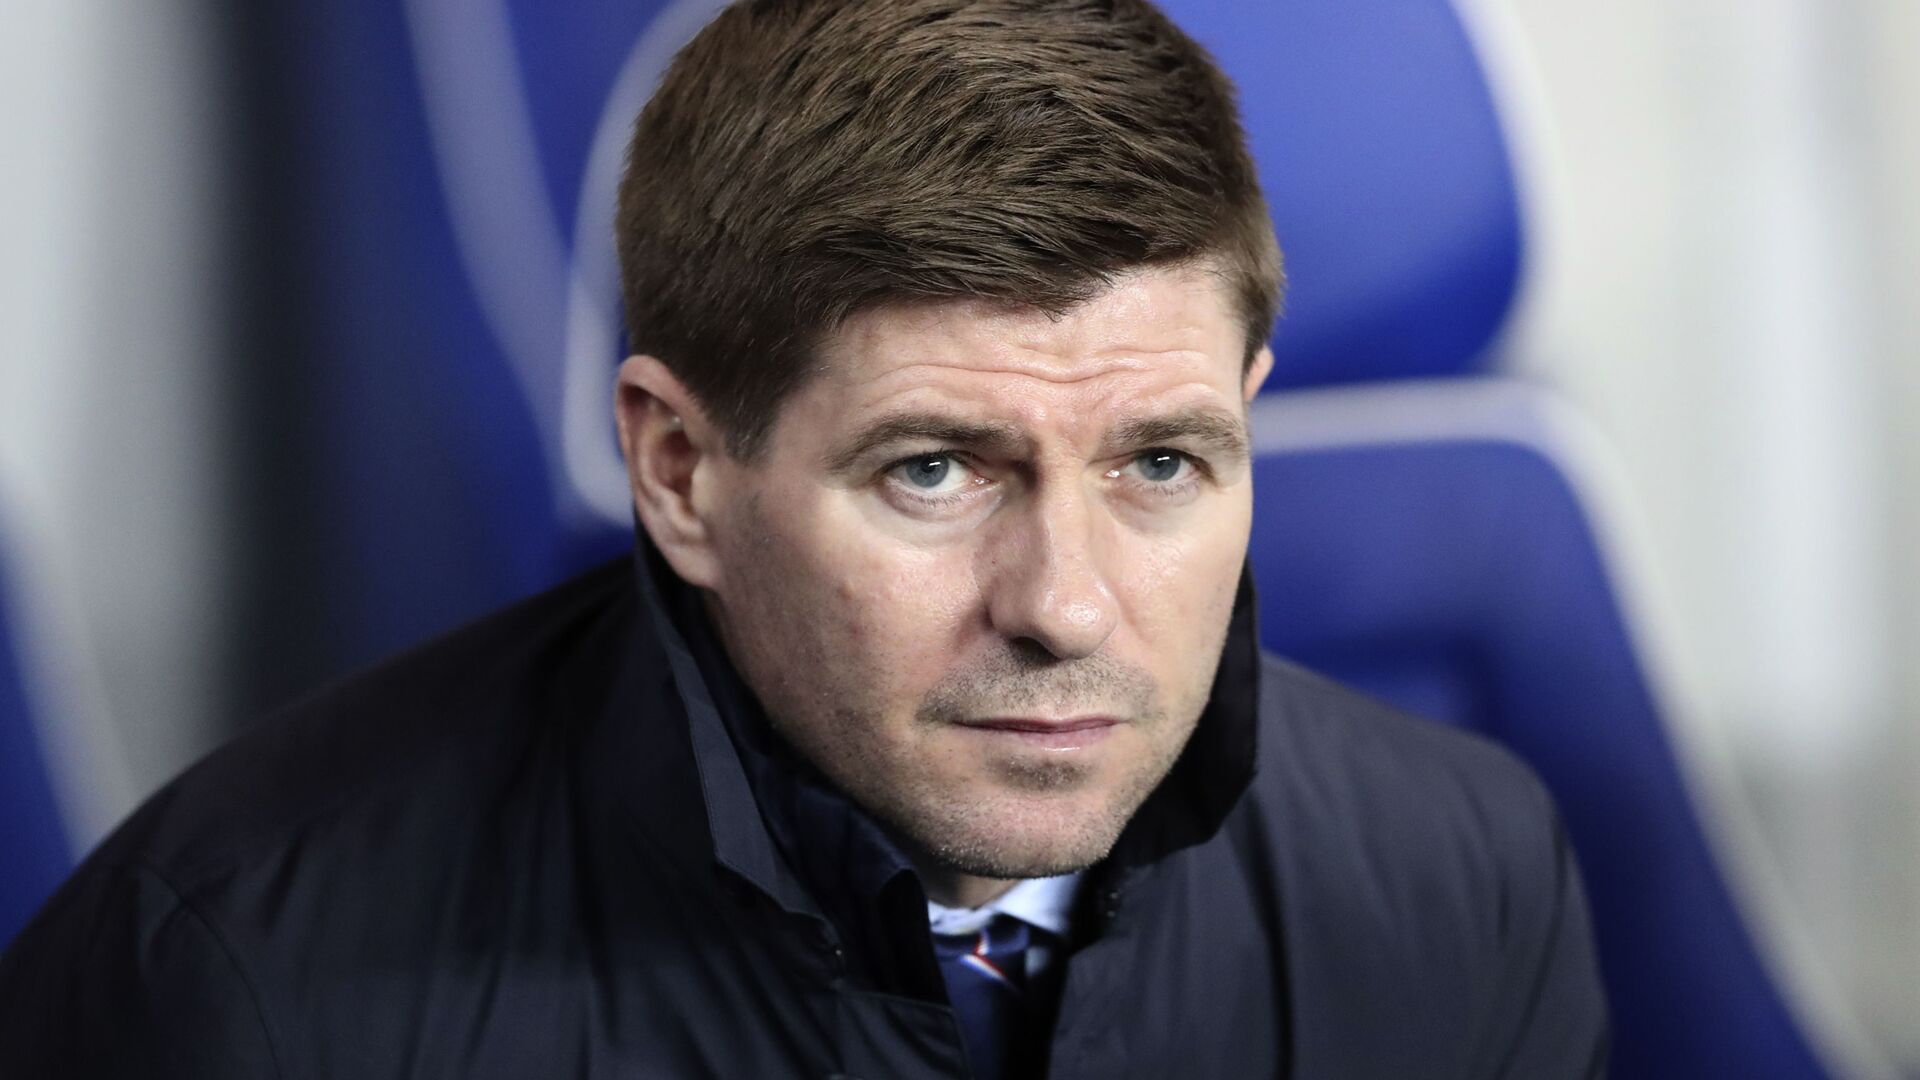 Rangers' manager Steven Gerrard sits on the bench during the Europa League round of 16 first leg soccer match between Rangers and Bayer Leverkusen at the Ibrox stadium in Glasgow, Scotland, Thursday, March 12, 2020 - Sputnik International, 1920, 25.01.2022